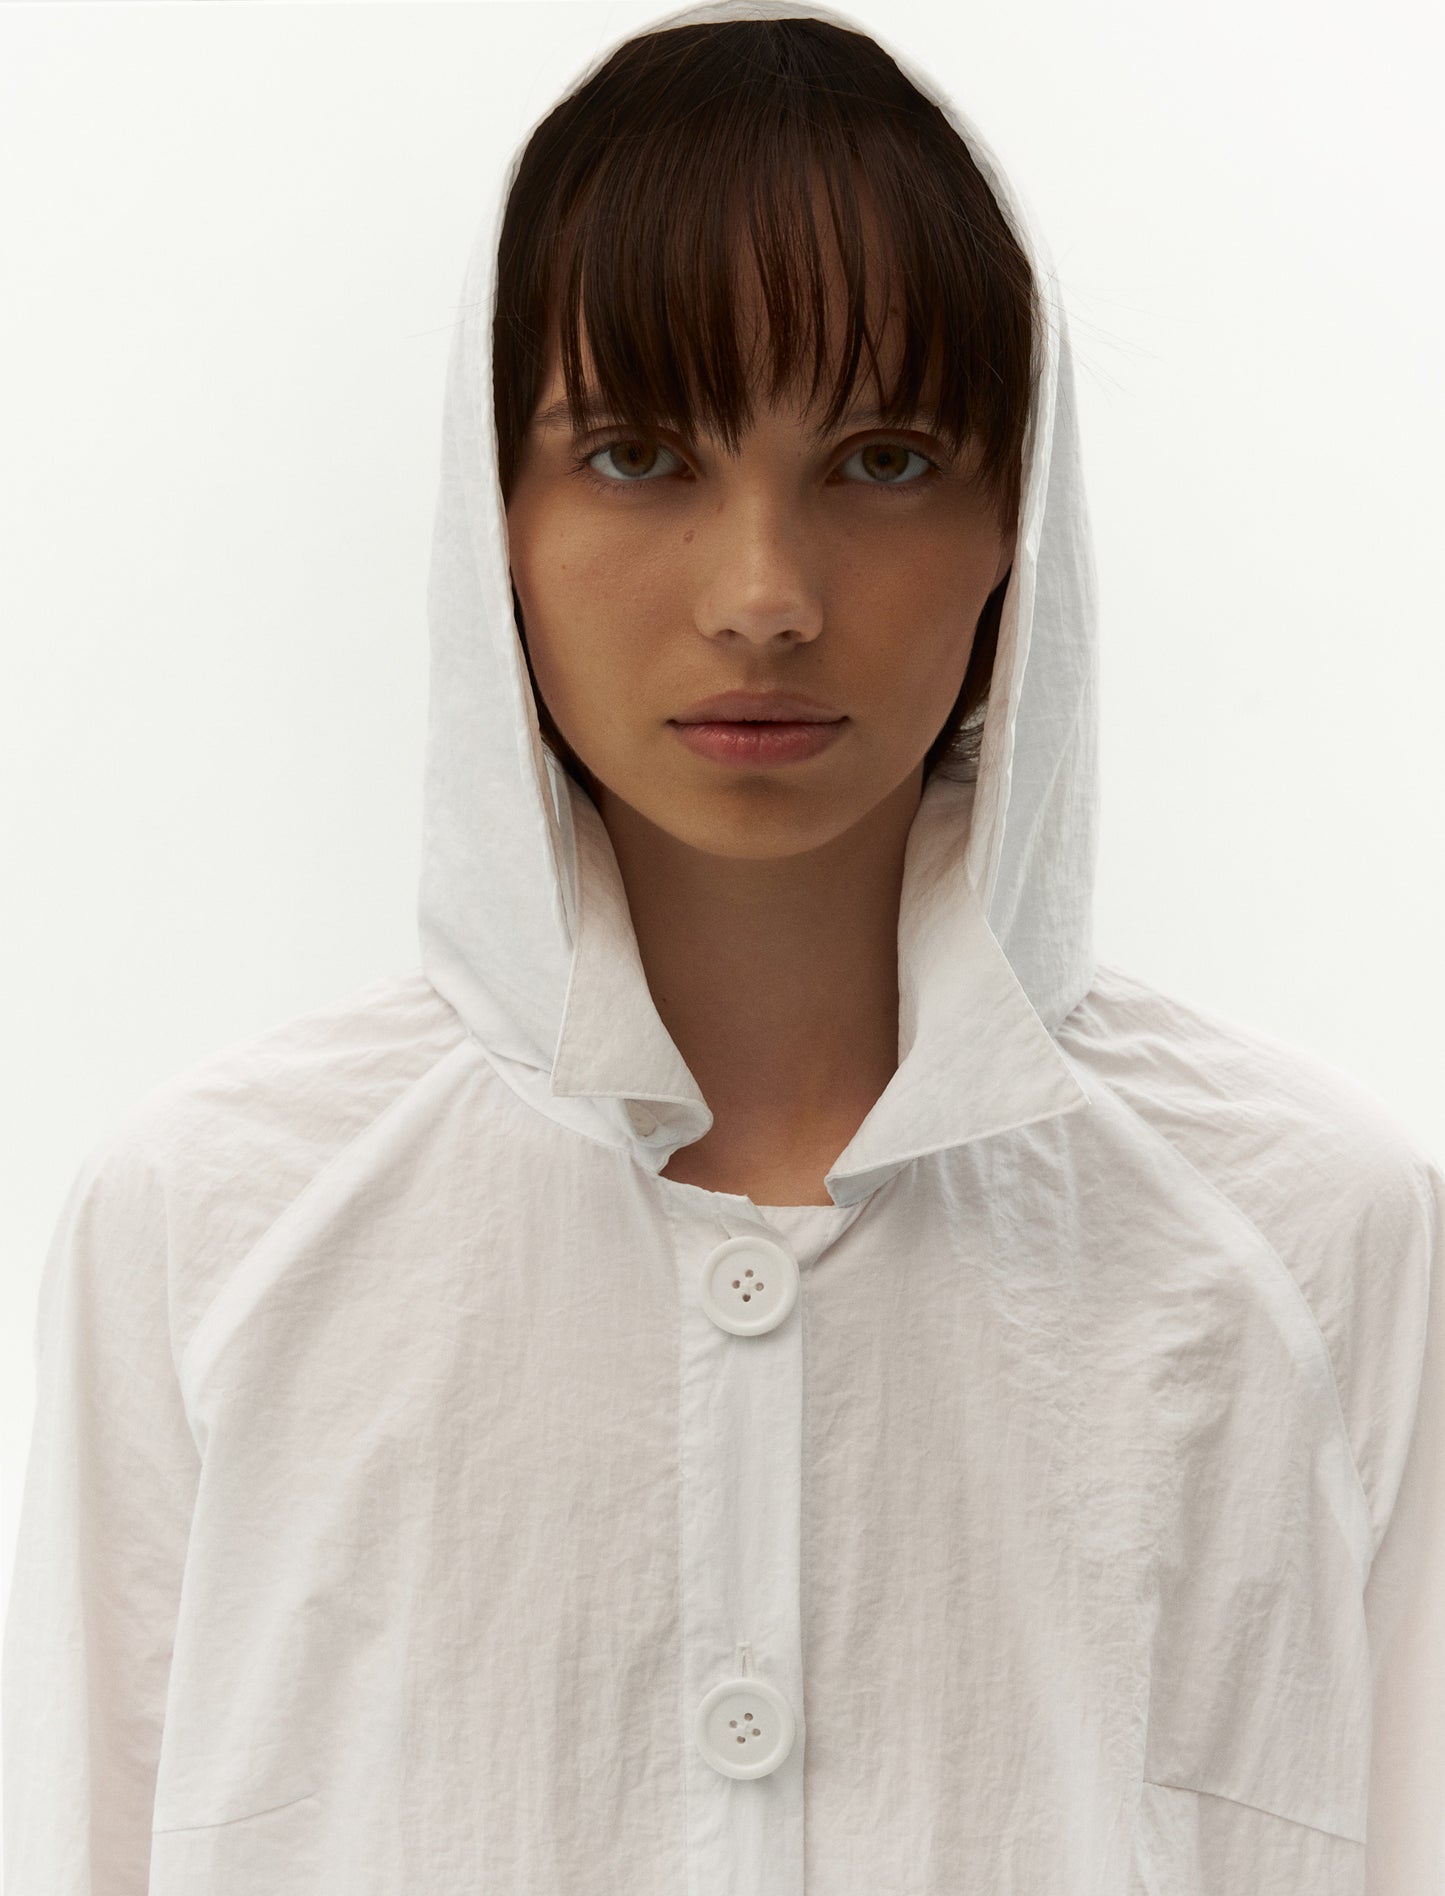 raincoat with hood in white color. Forma fashion brand